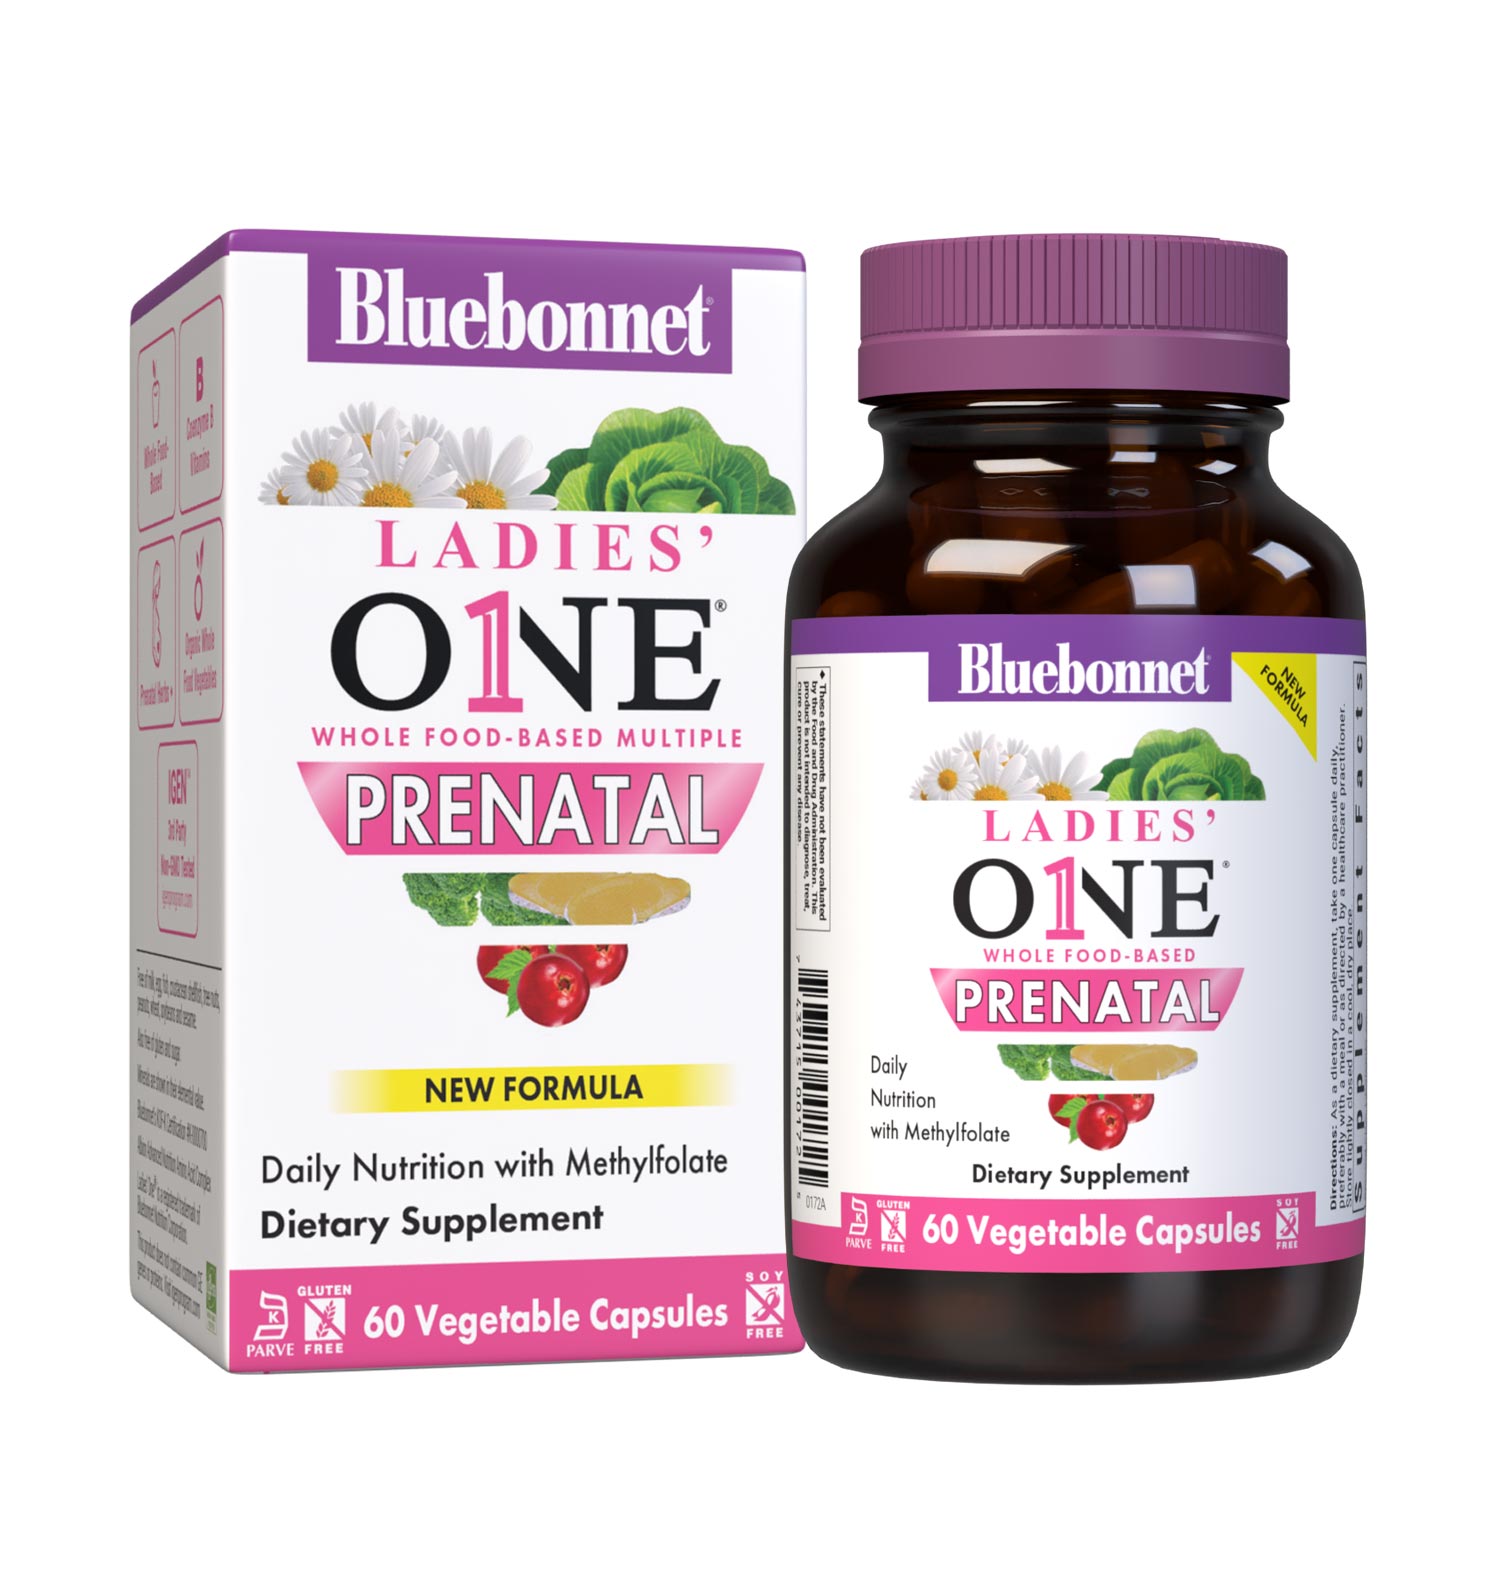 Bluebonnet's Ladies One prenatal whole food-based multiple 30 vegetable capsules is formulated with highly bioavailable non-GMO ingredients such as active coenzyme forms of B vitamins, vitamin K2, vitamin E from sunflower along with sustainably harvested and wildcrafted herbs, superfruits and vegetables. Bottle with box image. #size_60 count